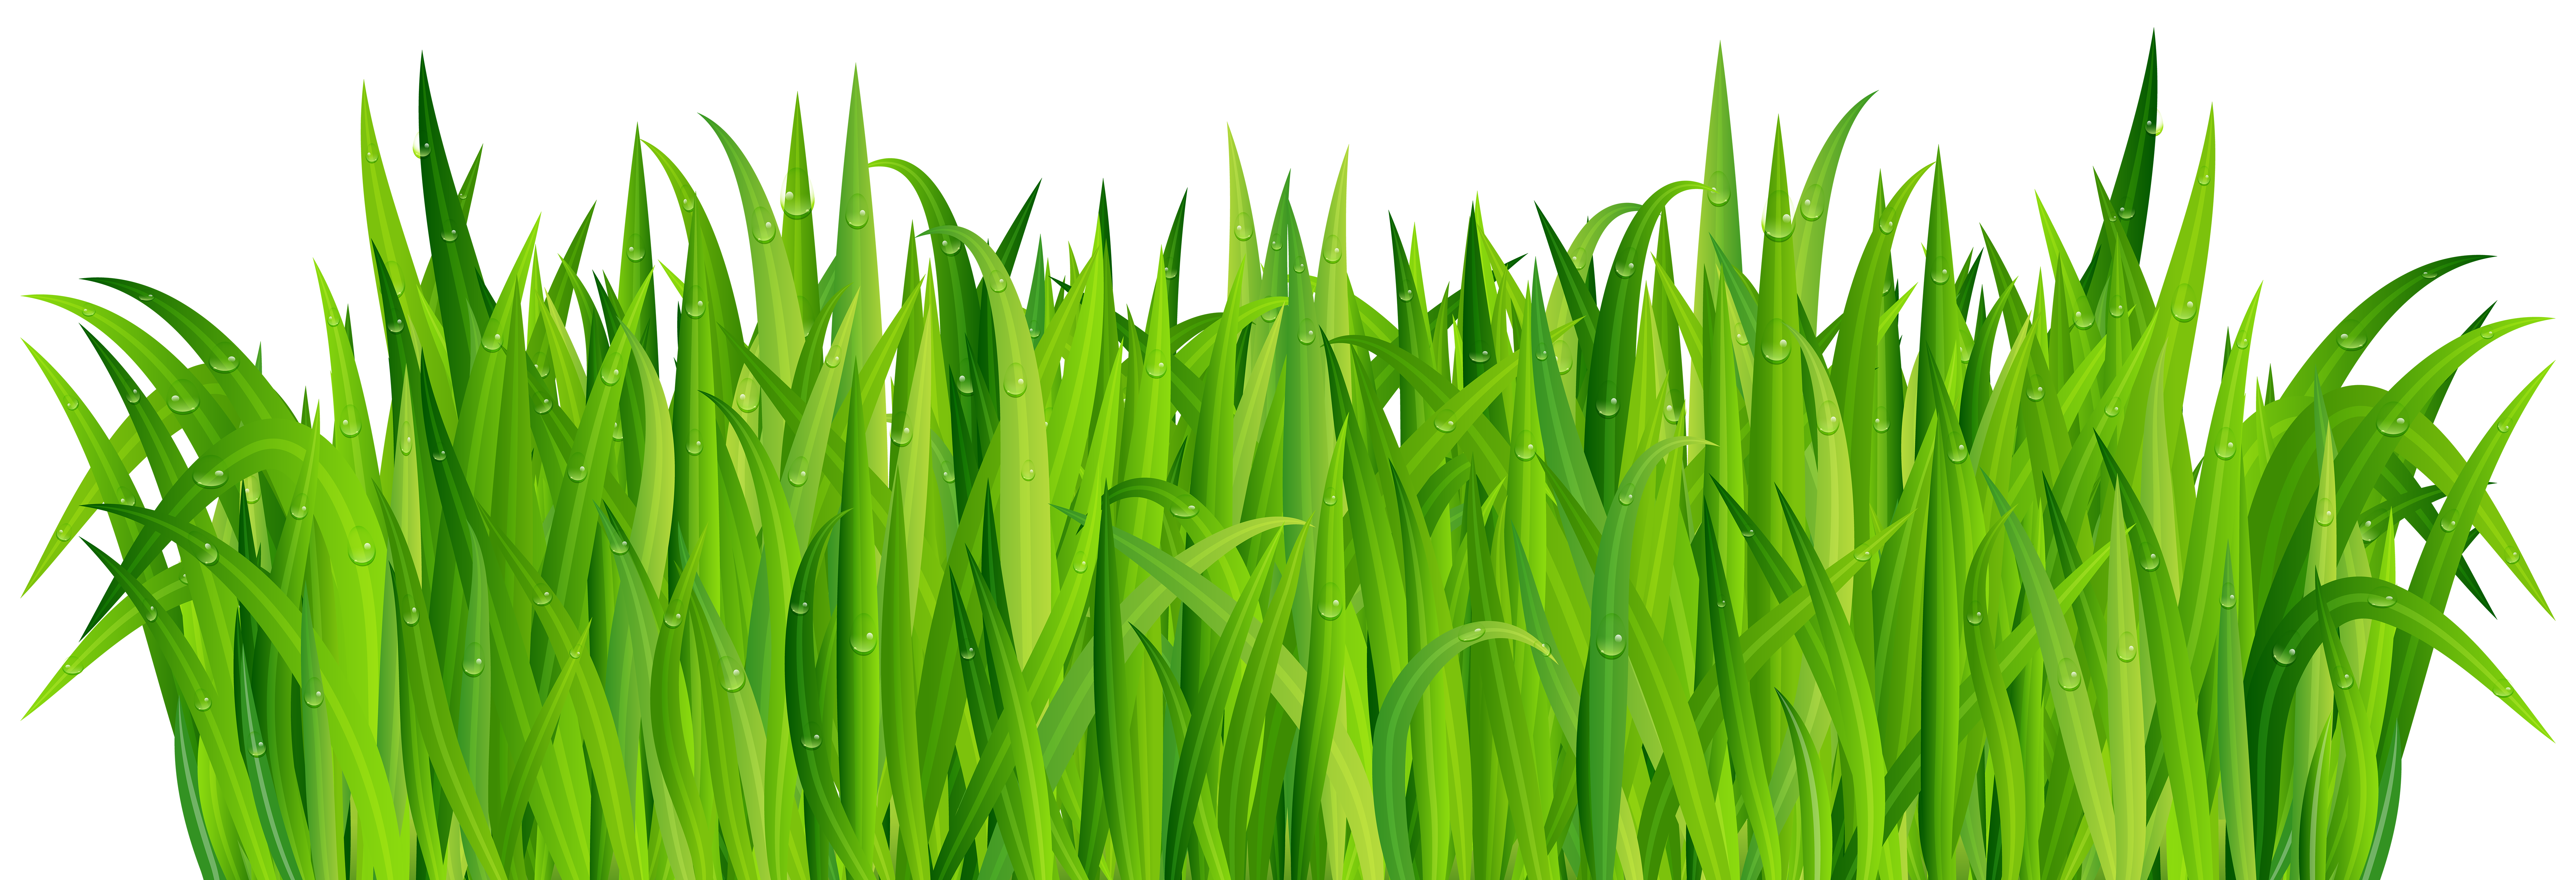 Fresh Green Grass Png Clip Art Image Gallery Yopriceville High Quality Images And Transparent Png Free Clipart